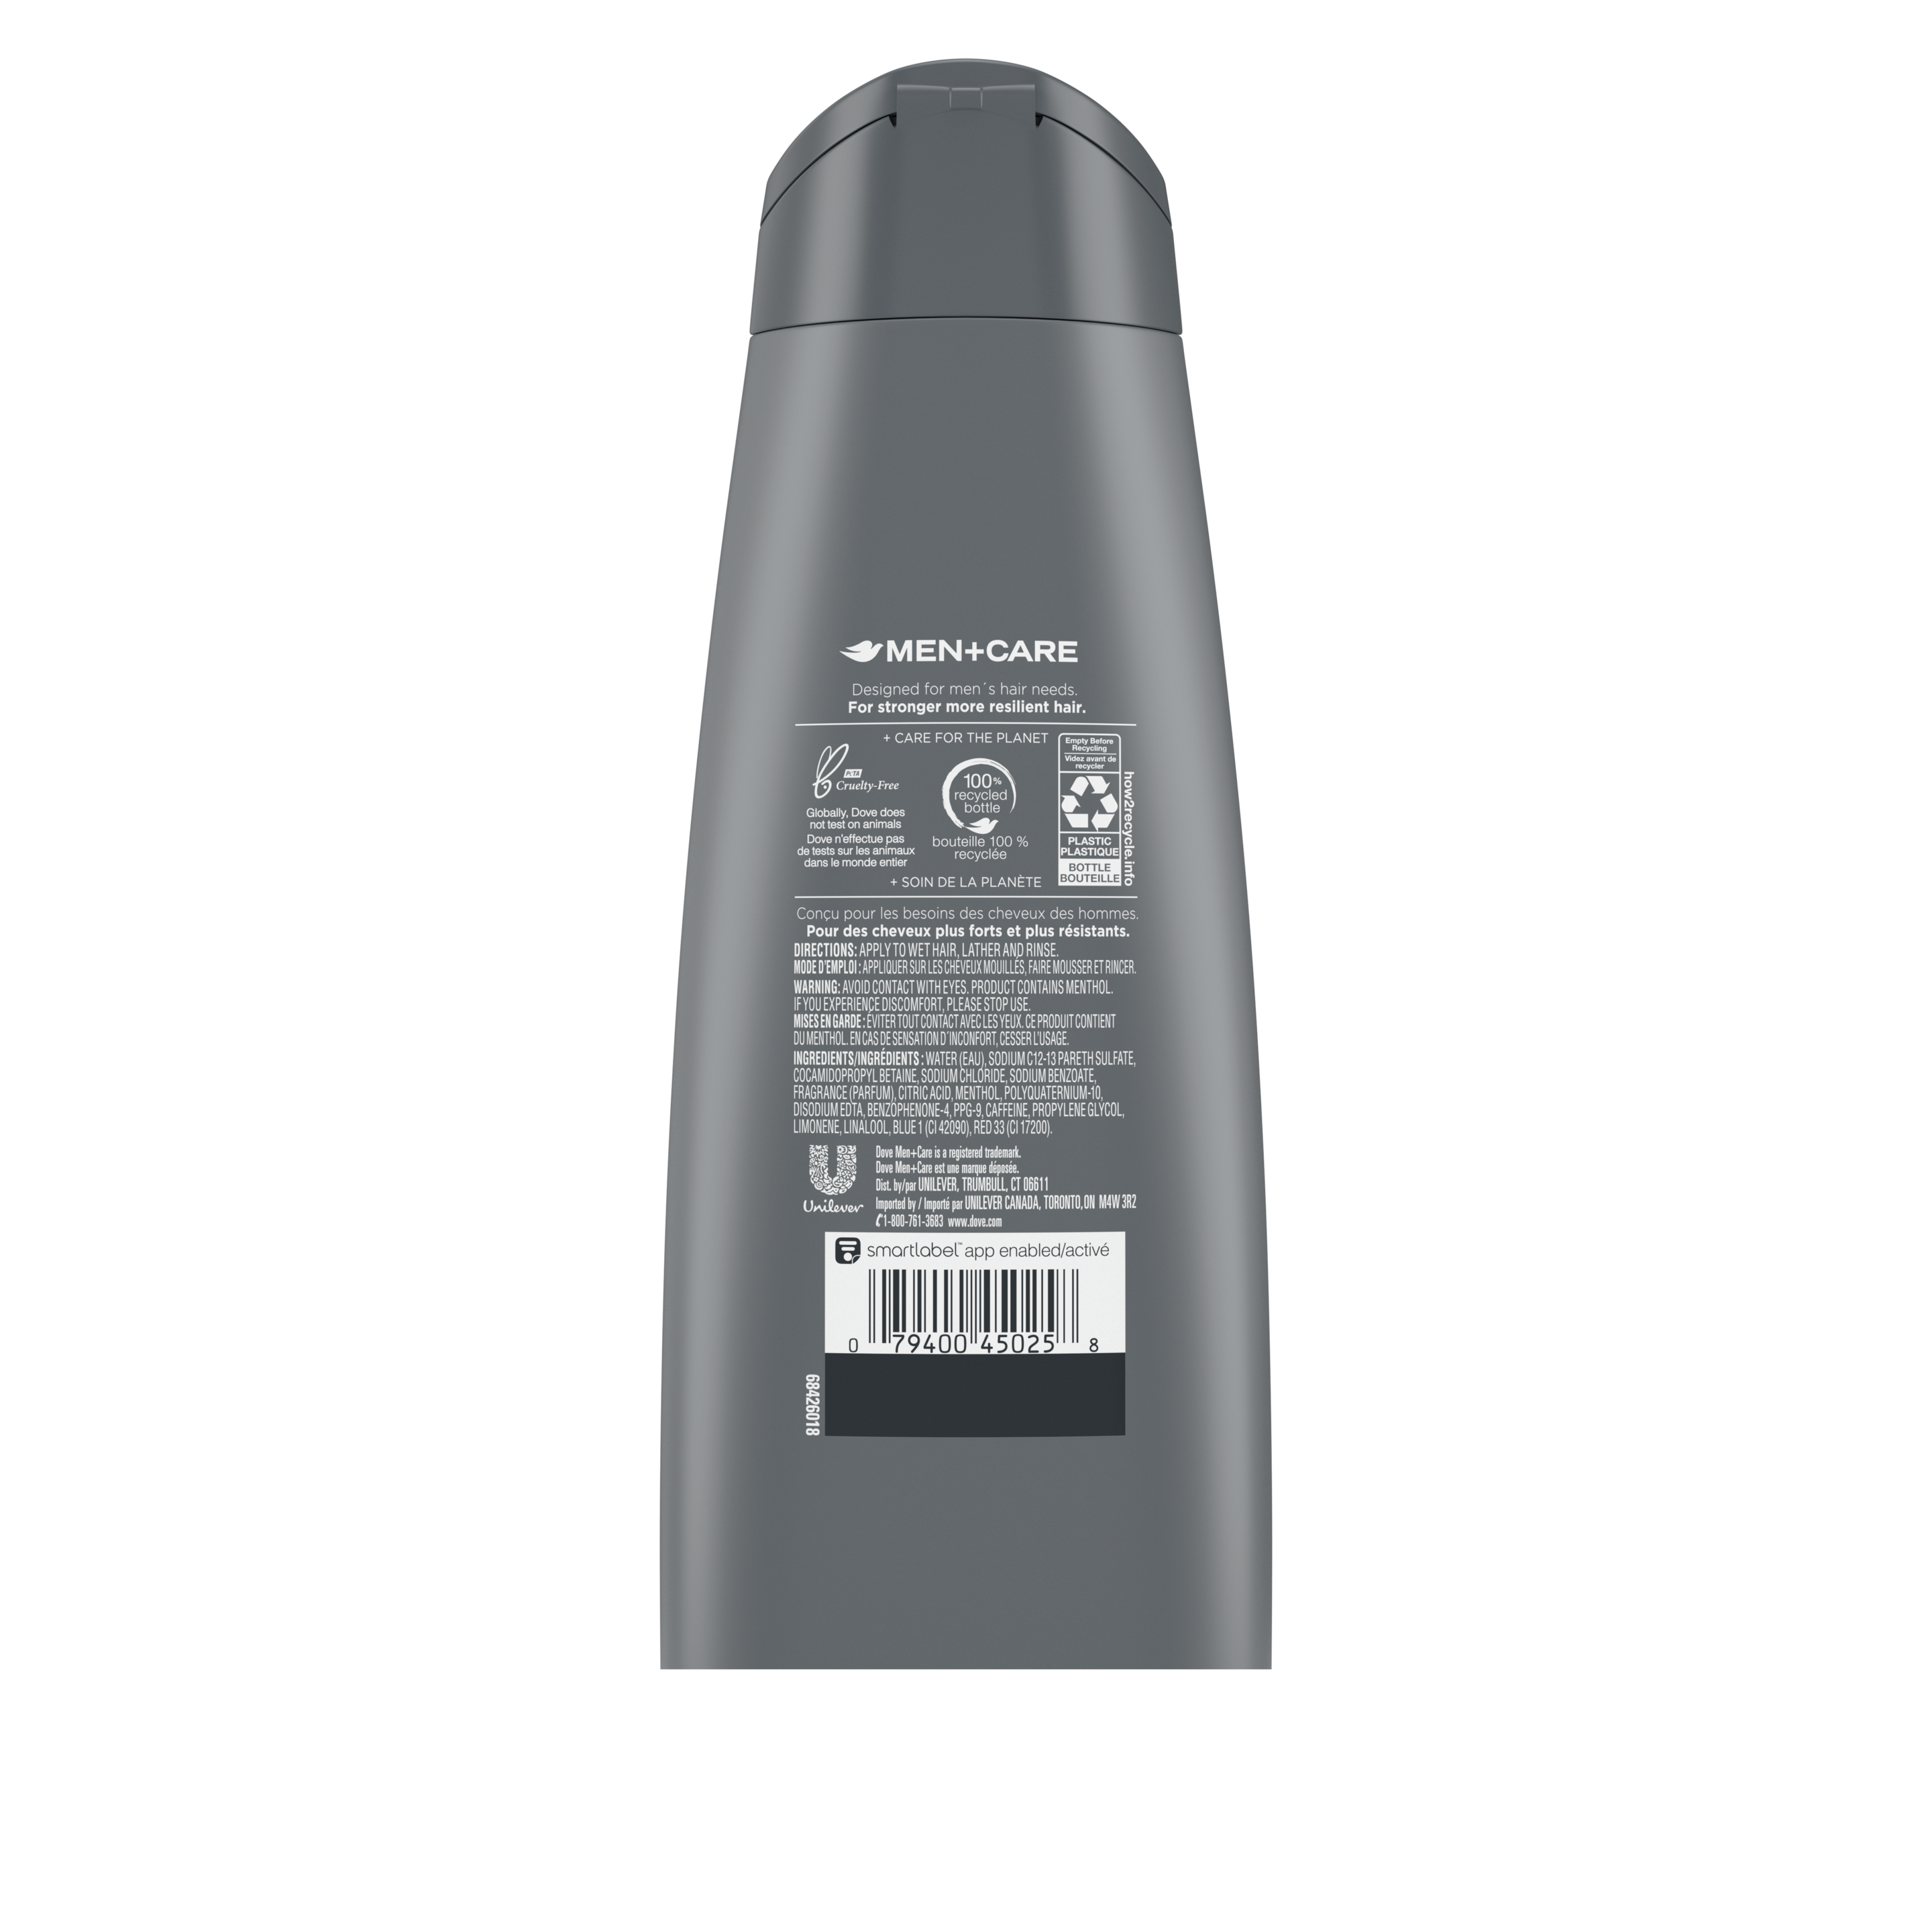 Men+Care Cooling Relief Cleansing Shampoo with Menthol